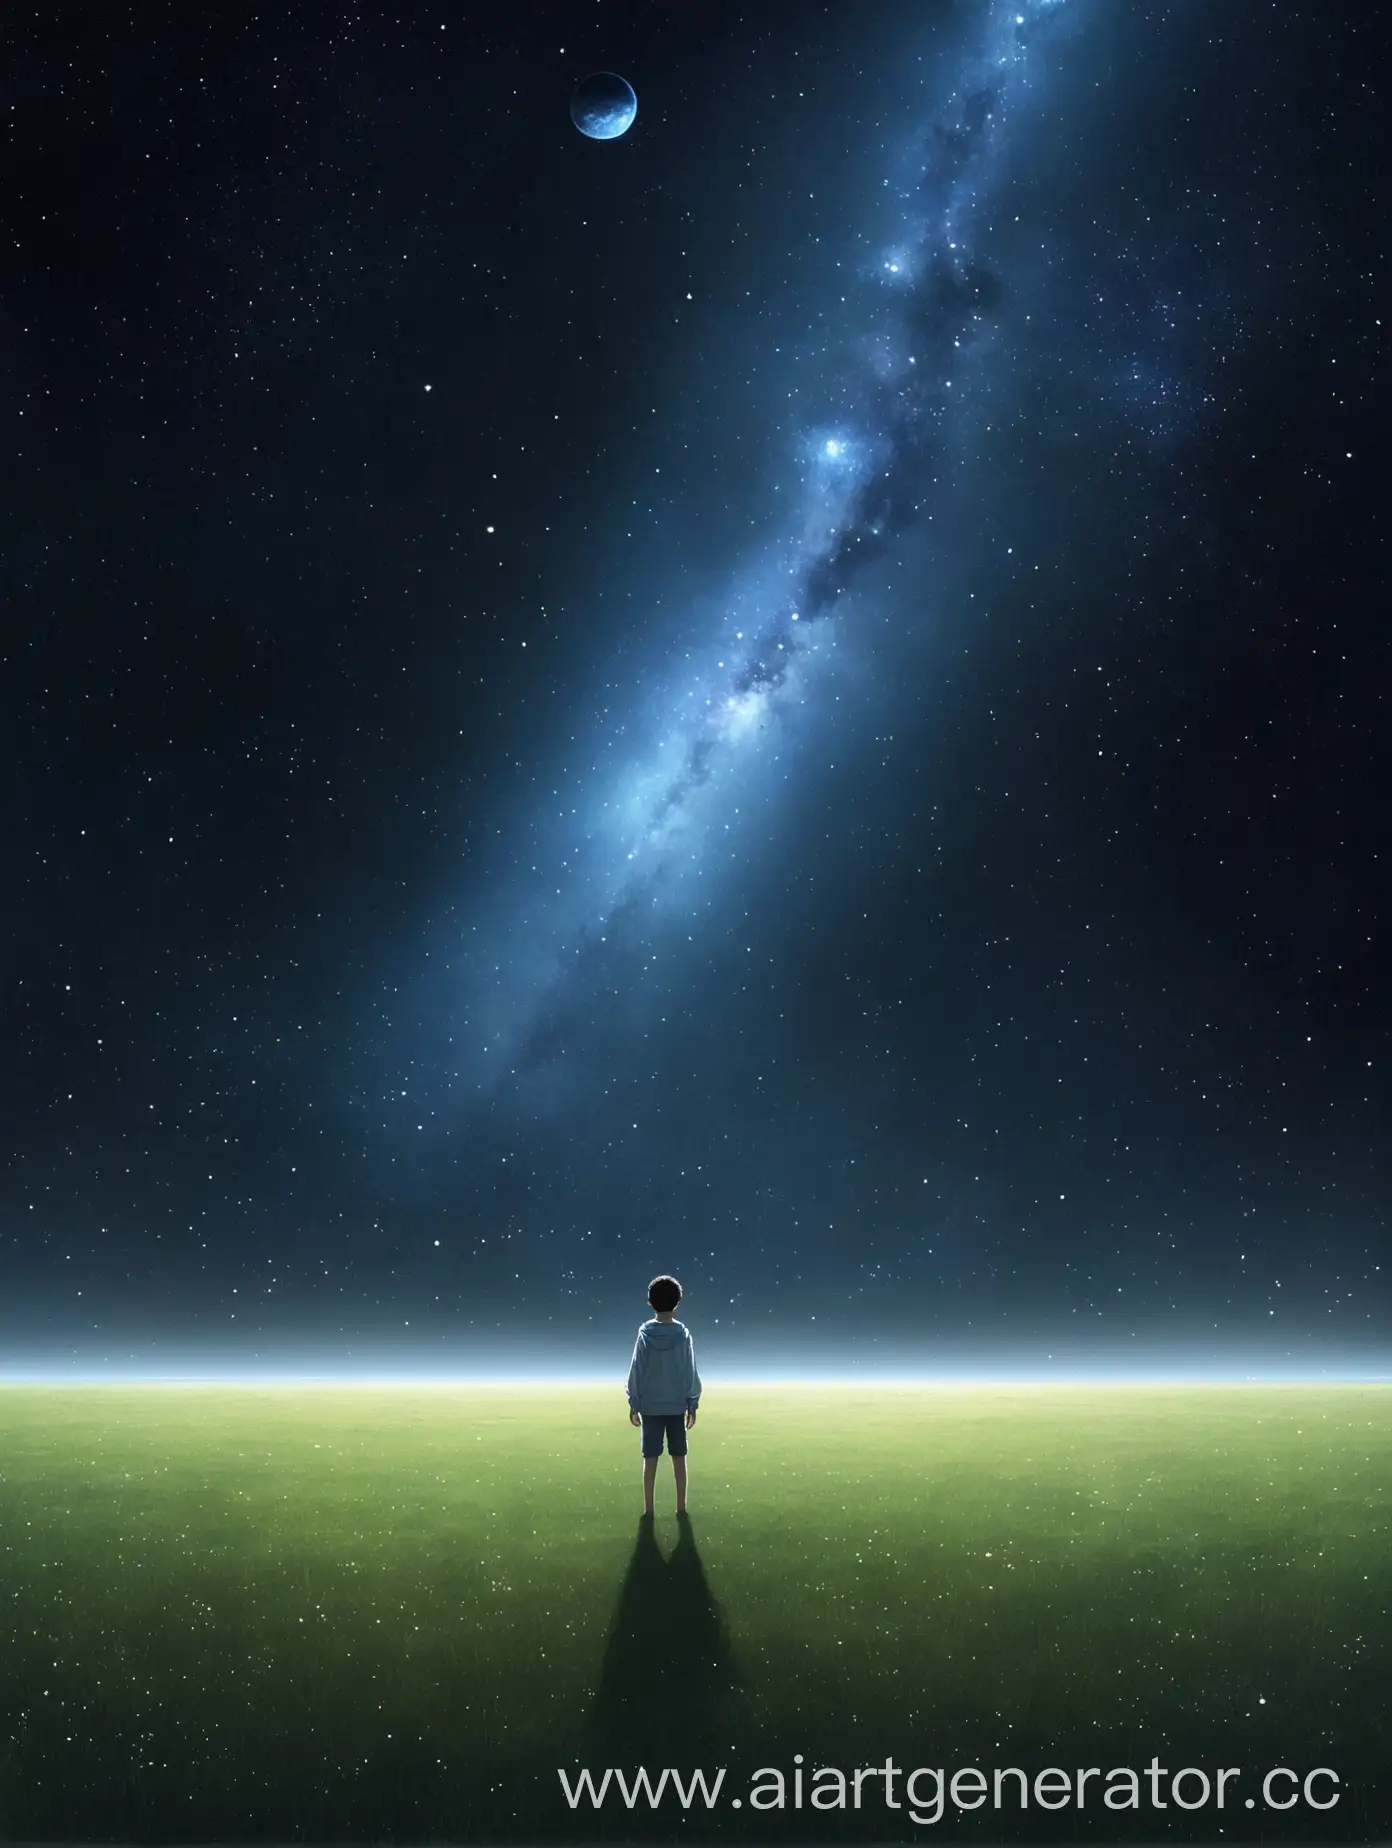 Boy-Standing-on-Field-with-Expansive-Space-Sky